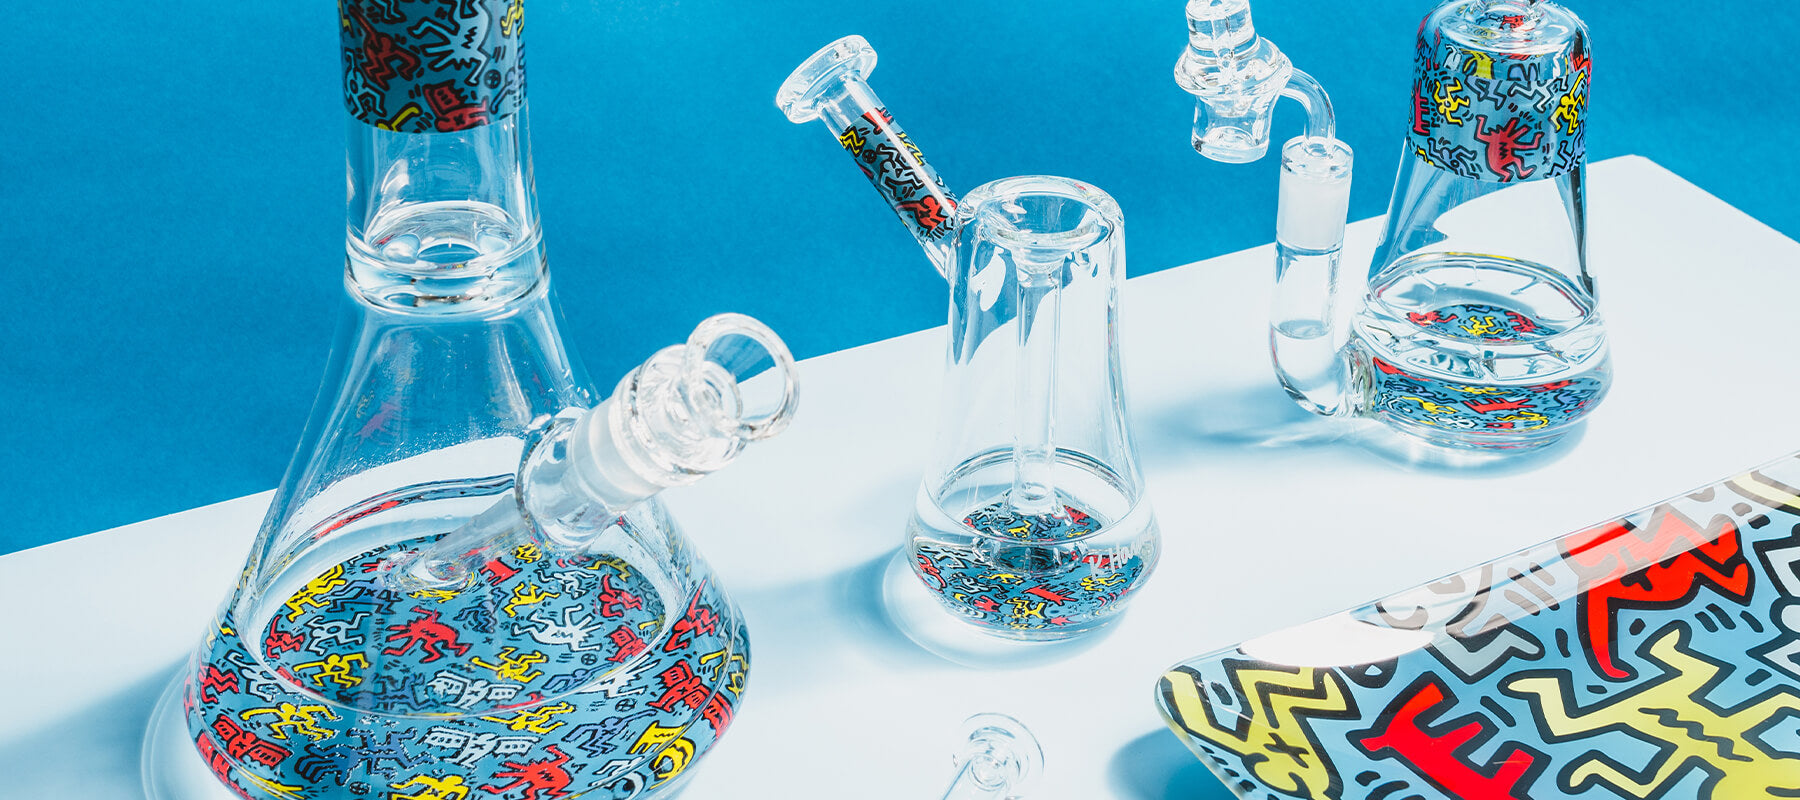 Keith Haring glass collection bongs and pipes